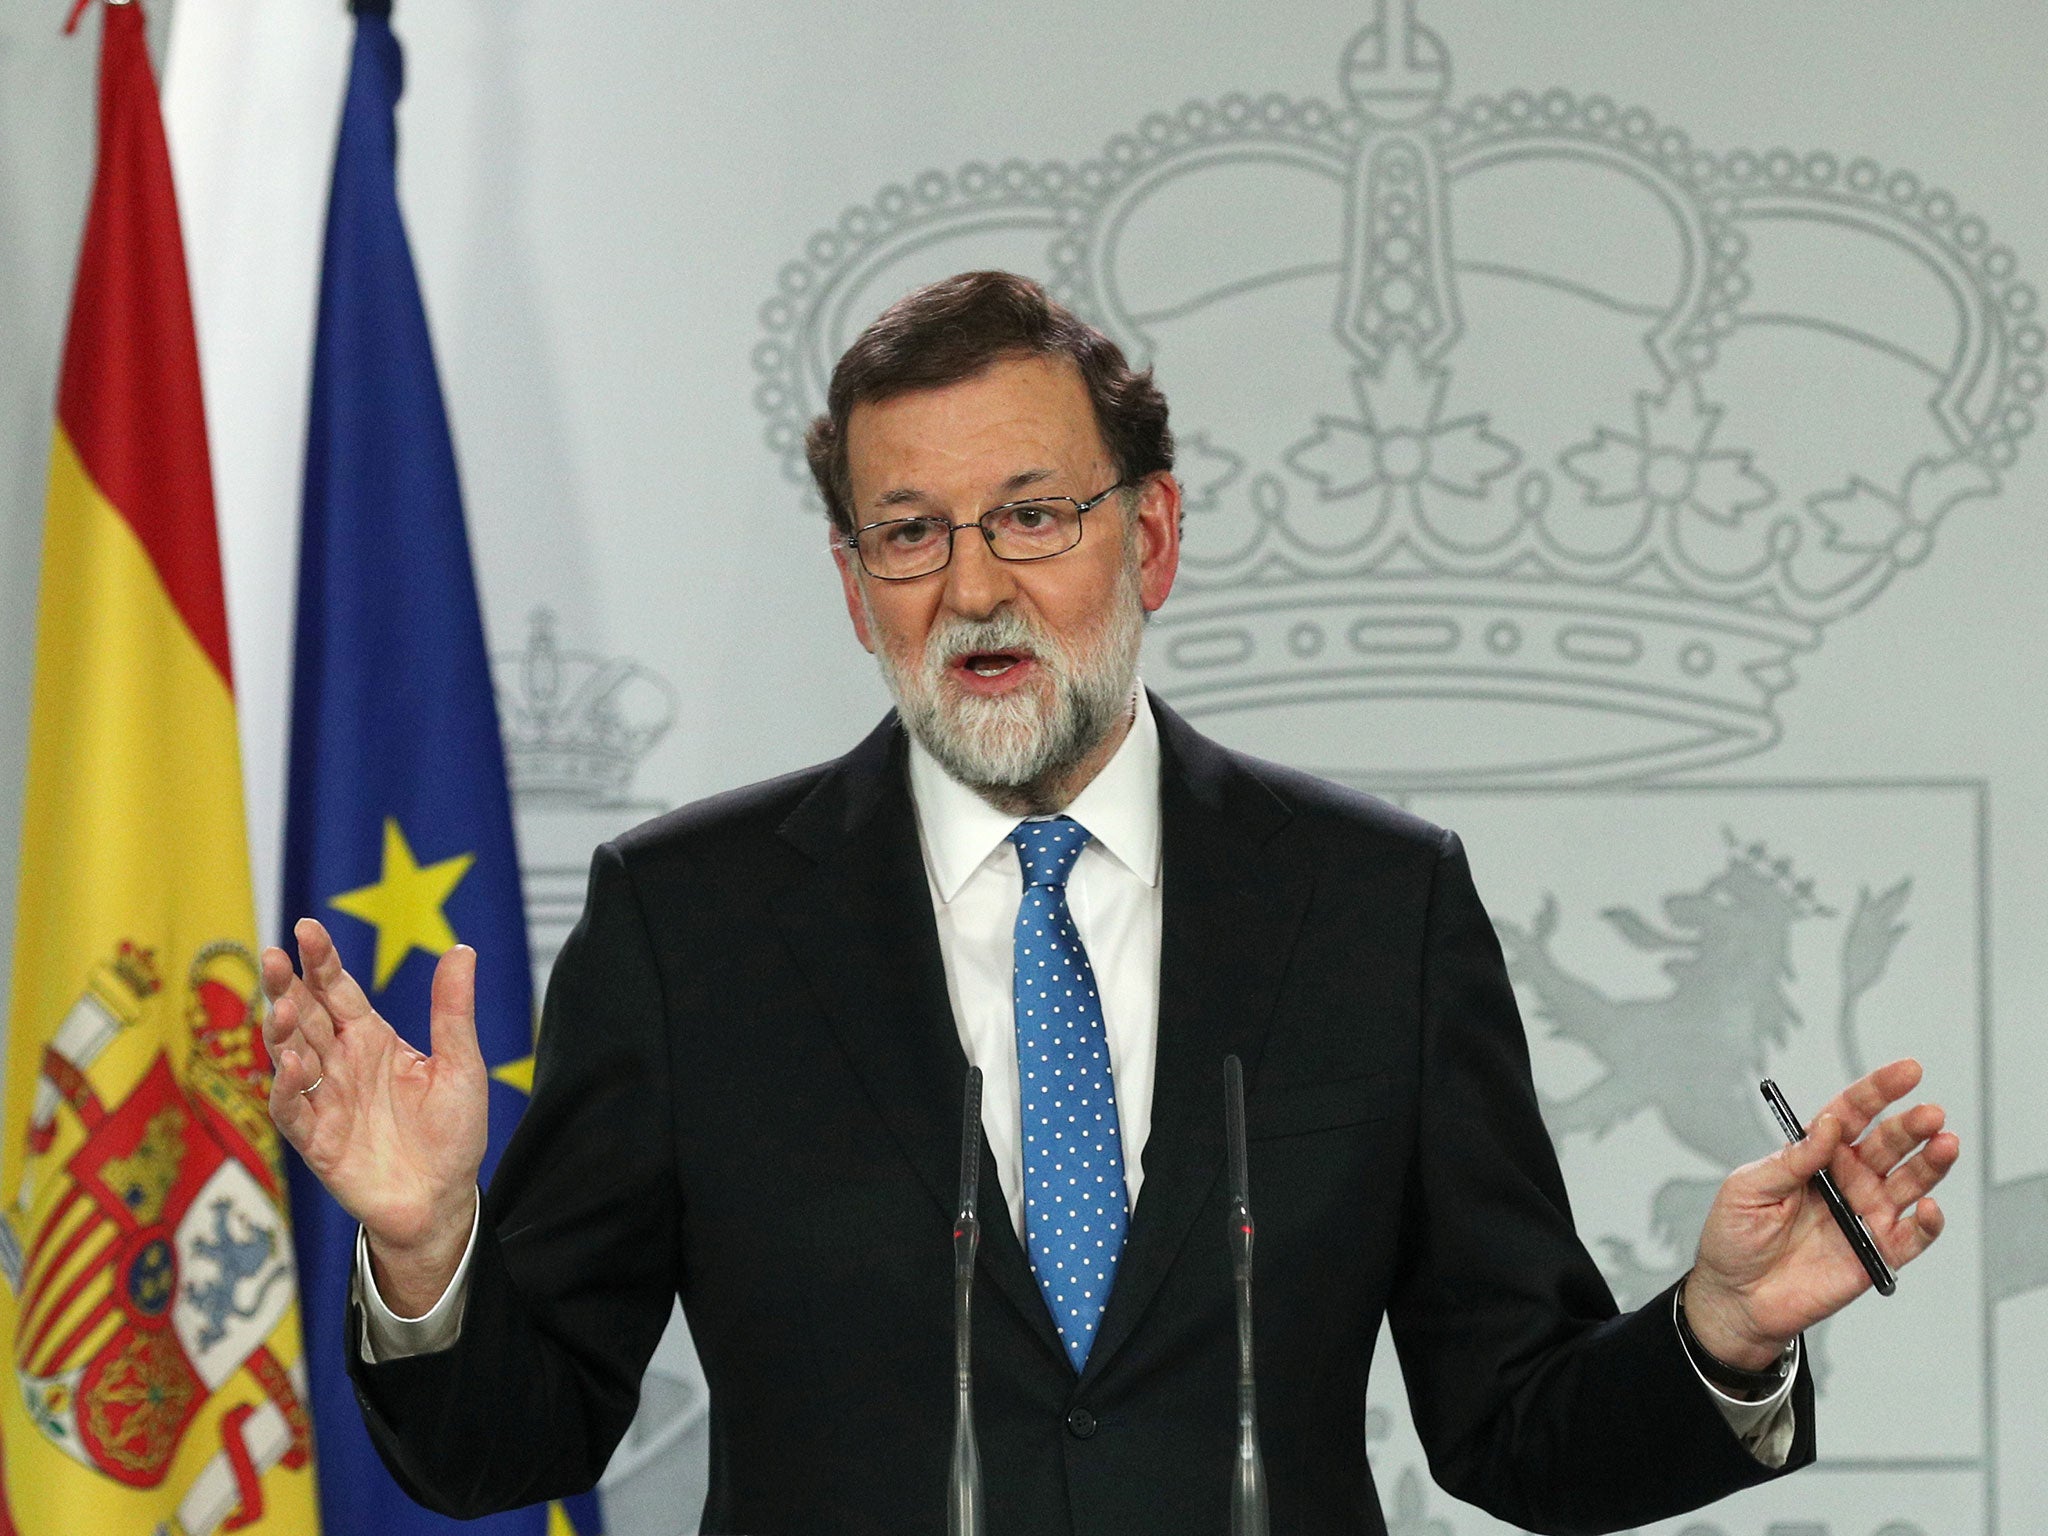 Mr Rajoy made clear that the new government in Catalonia must follow the law